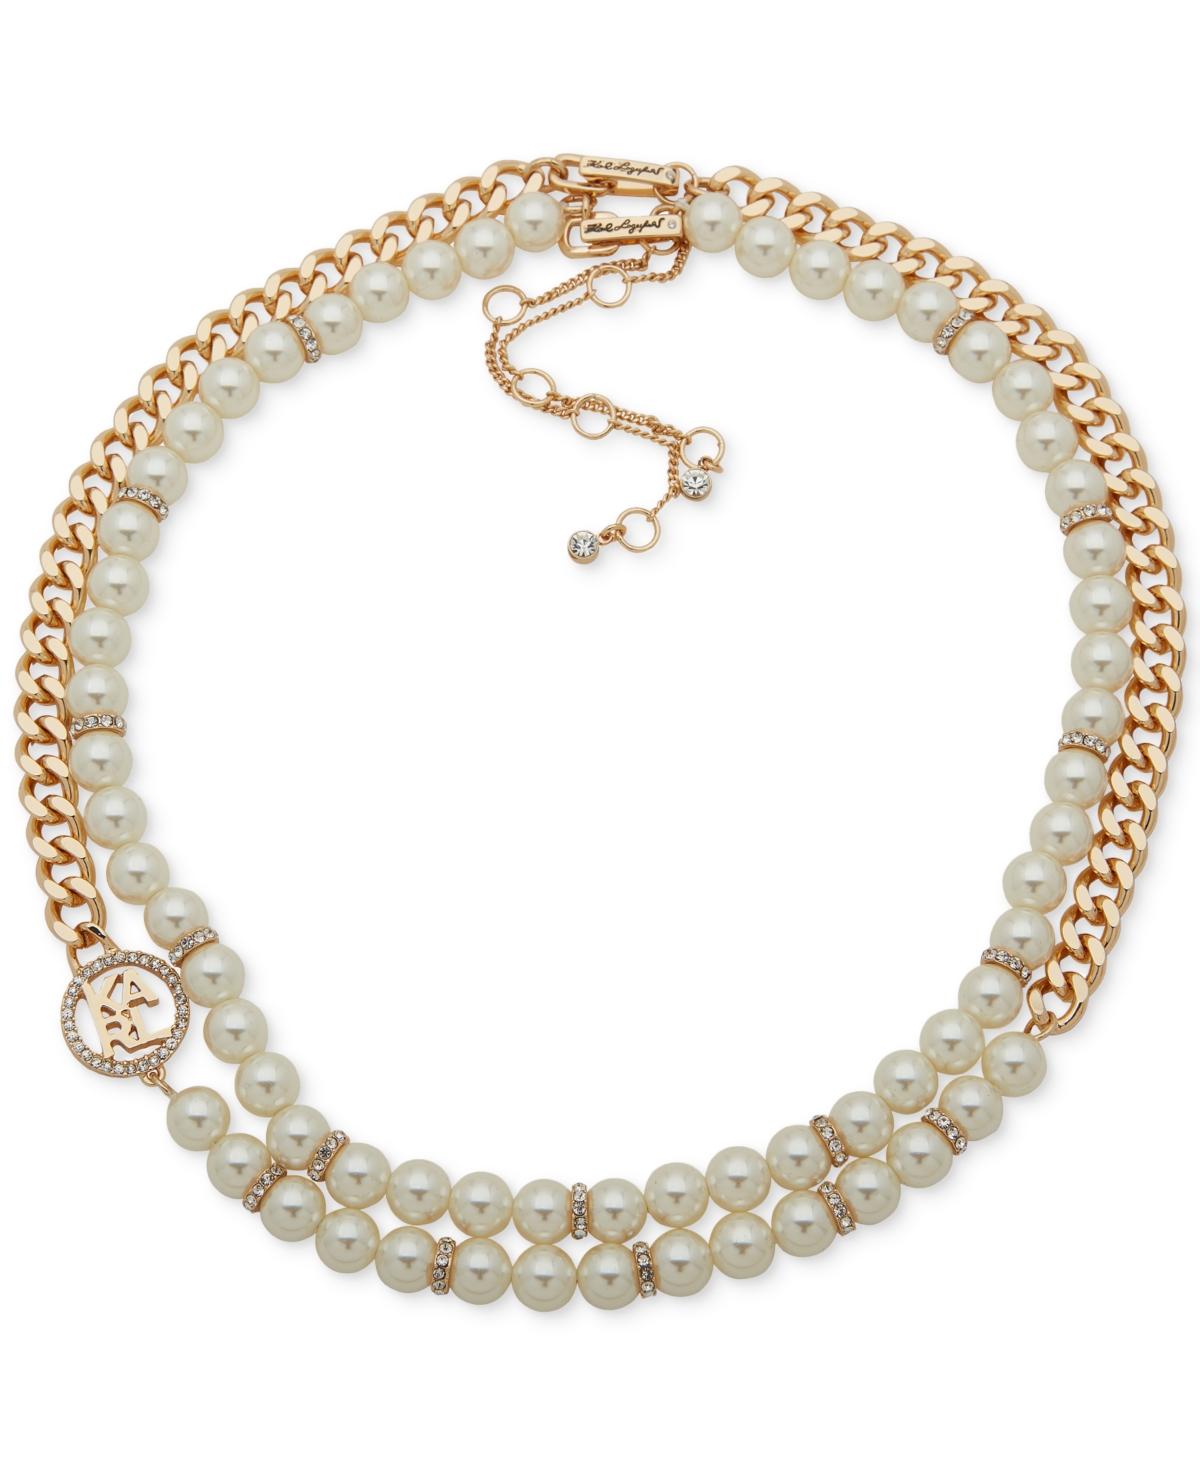 Karl Lagerfeld Gold-tone Imitation Pearl Omega Double Row Necklace, 16" + 3" Extender